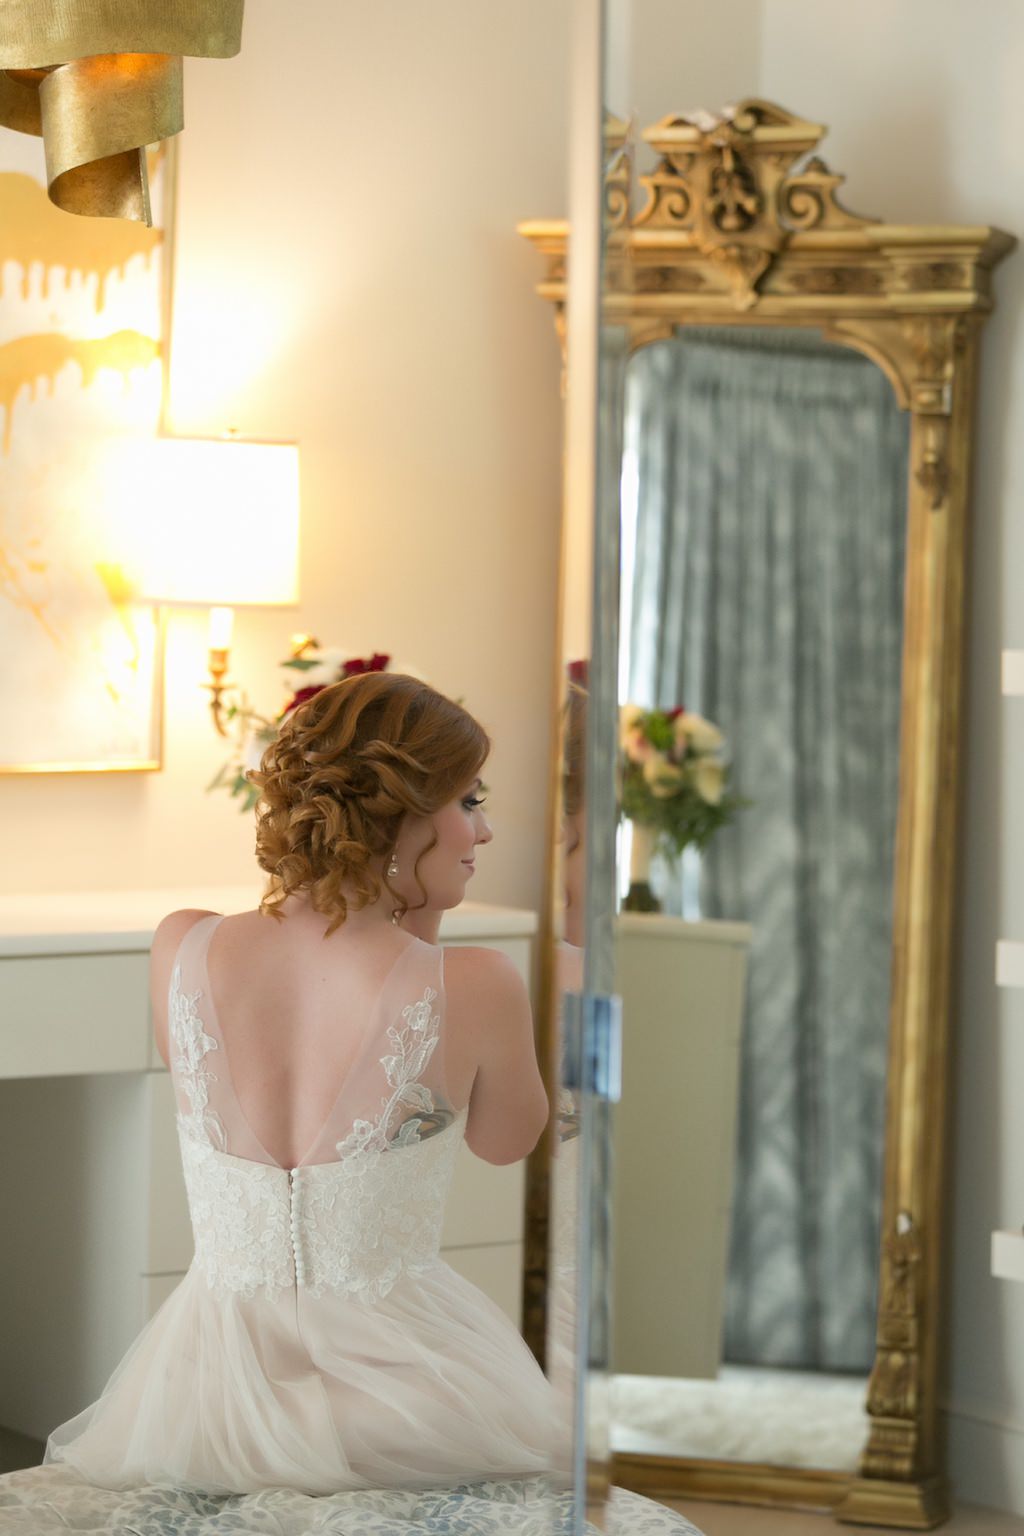 Bride Getting Ready Portrait | Tampa Wedding Photographer Andi Diamond Photography | Hair and Makeup Michele Renee The Studio